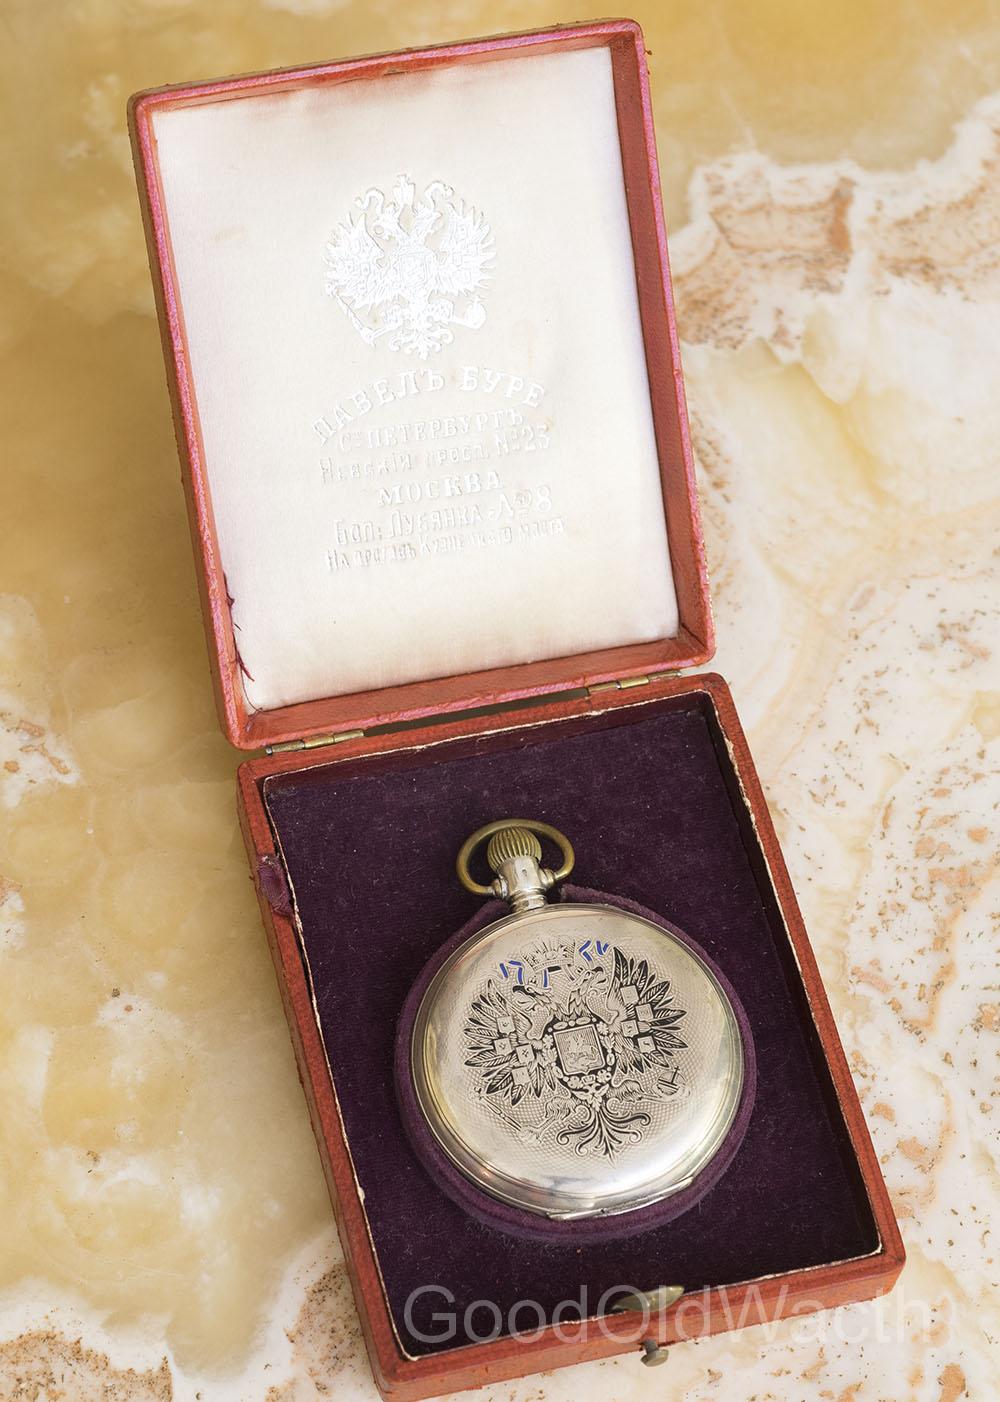 Antique Silver Paul Buhre Павел Буре watch with Eagle - IMPERIAL GIFT